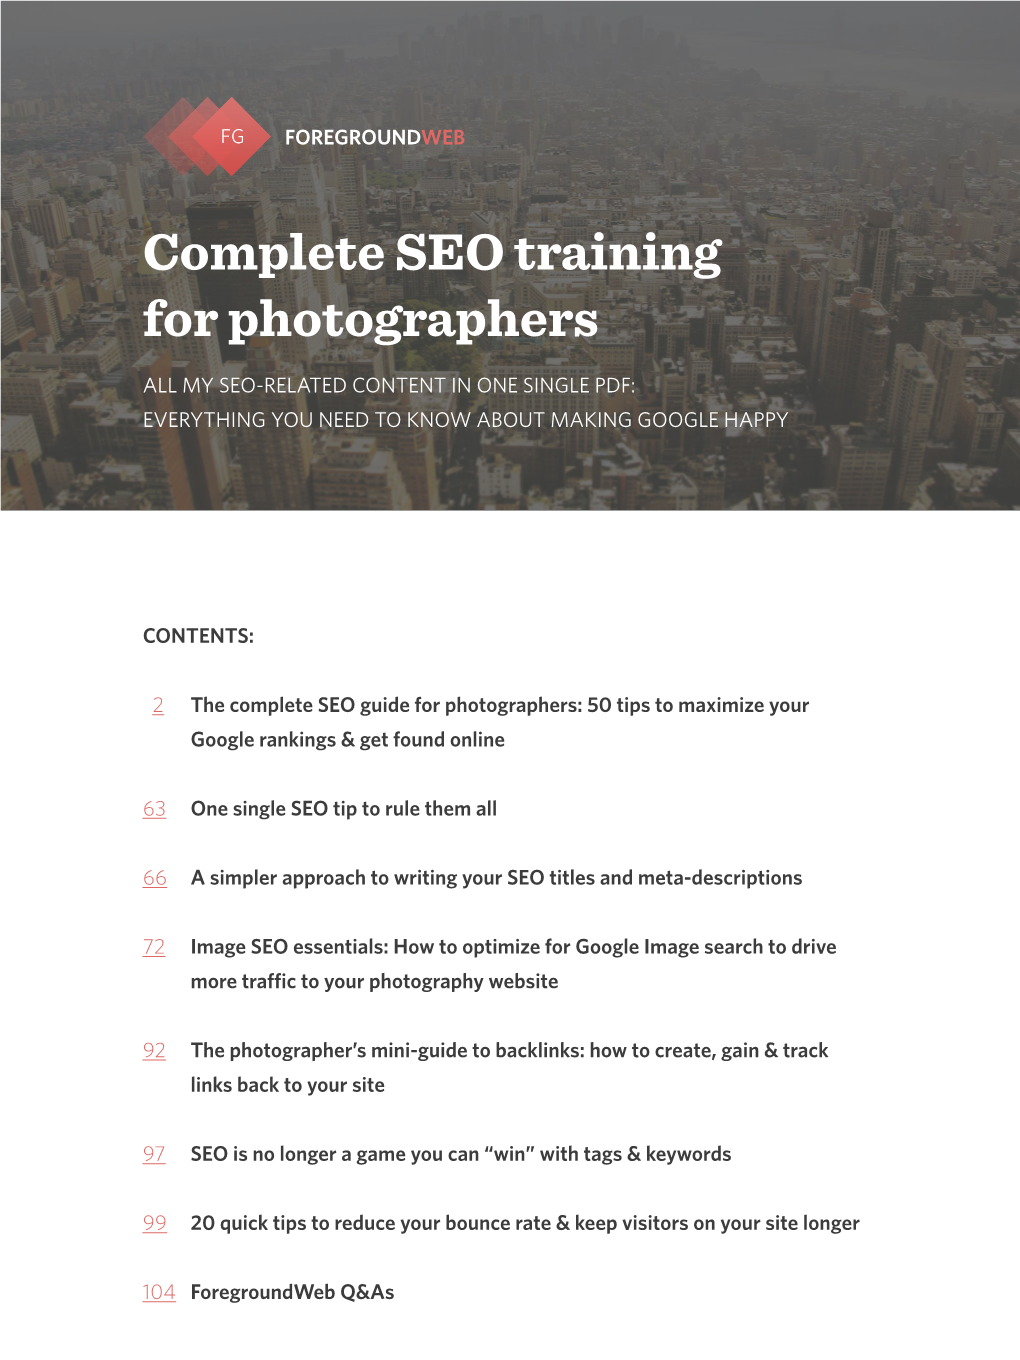 Complete SEO Training for Photographers